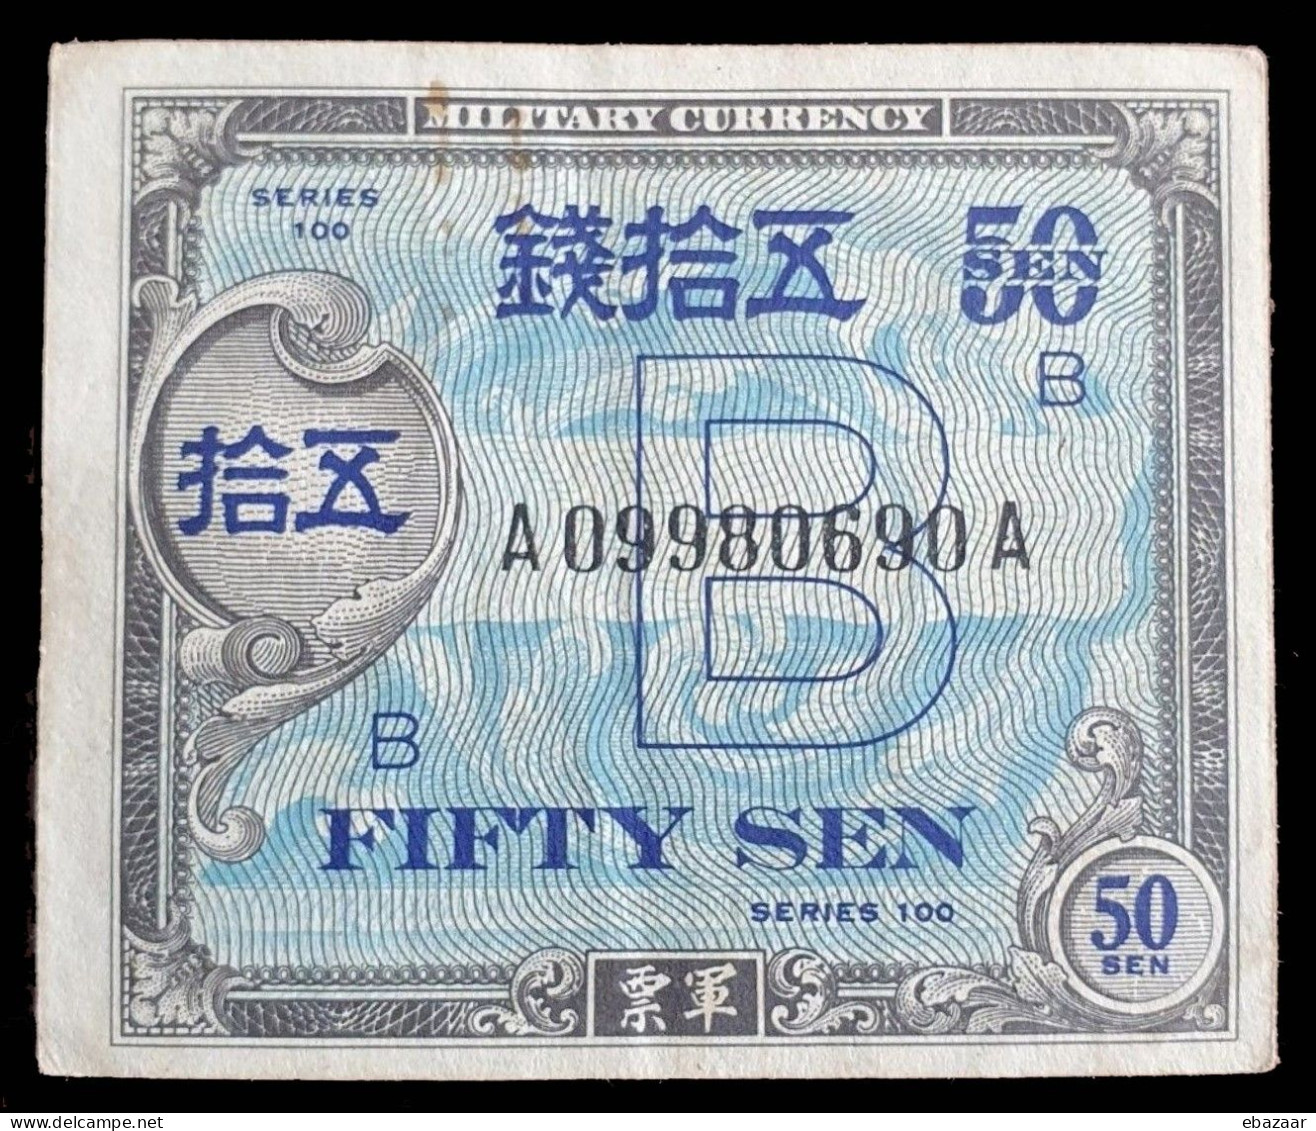 Japan 1945 Banknote Allied Military Command 50 Sen P-65 With "B" In Underprint + FREE GIFT - Japon